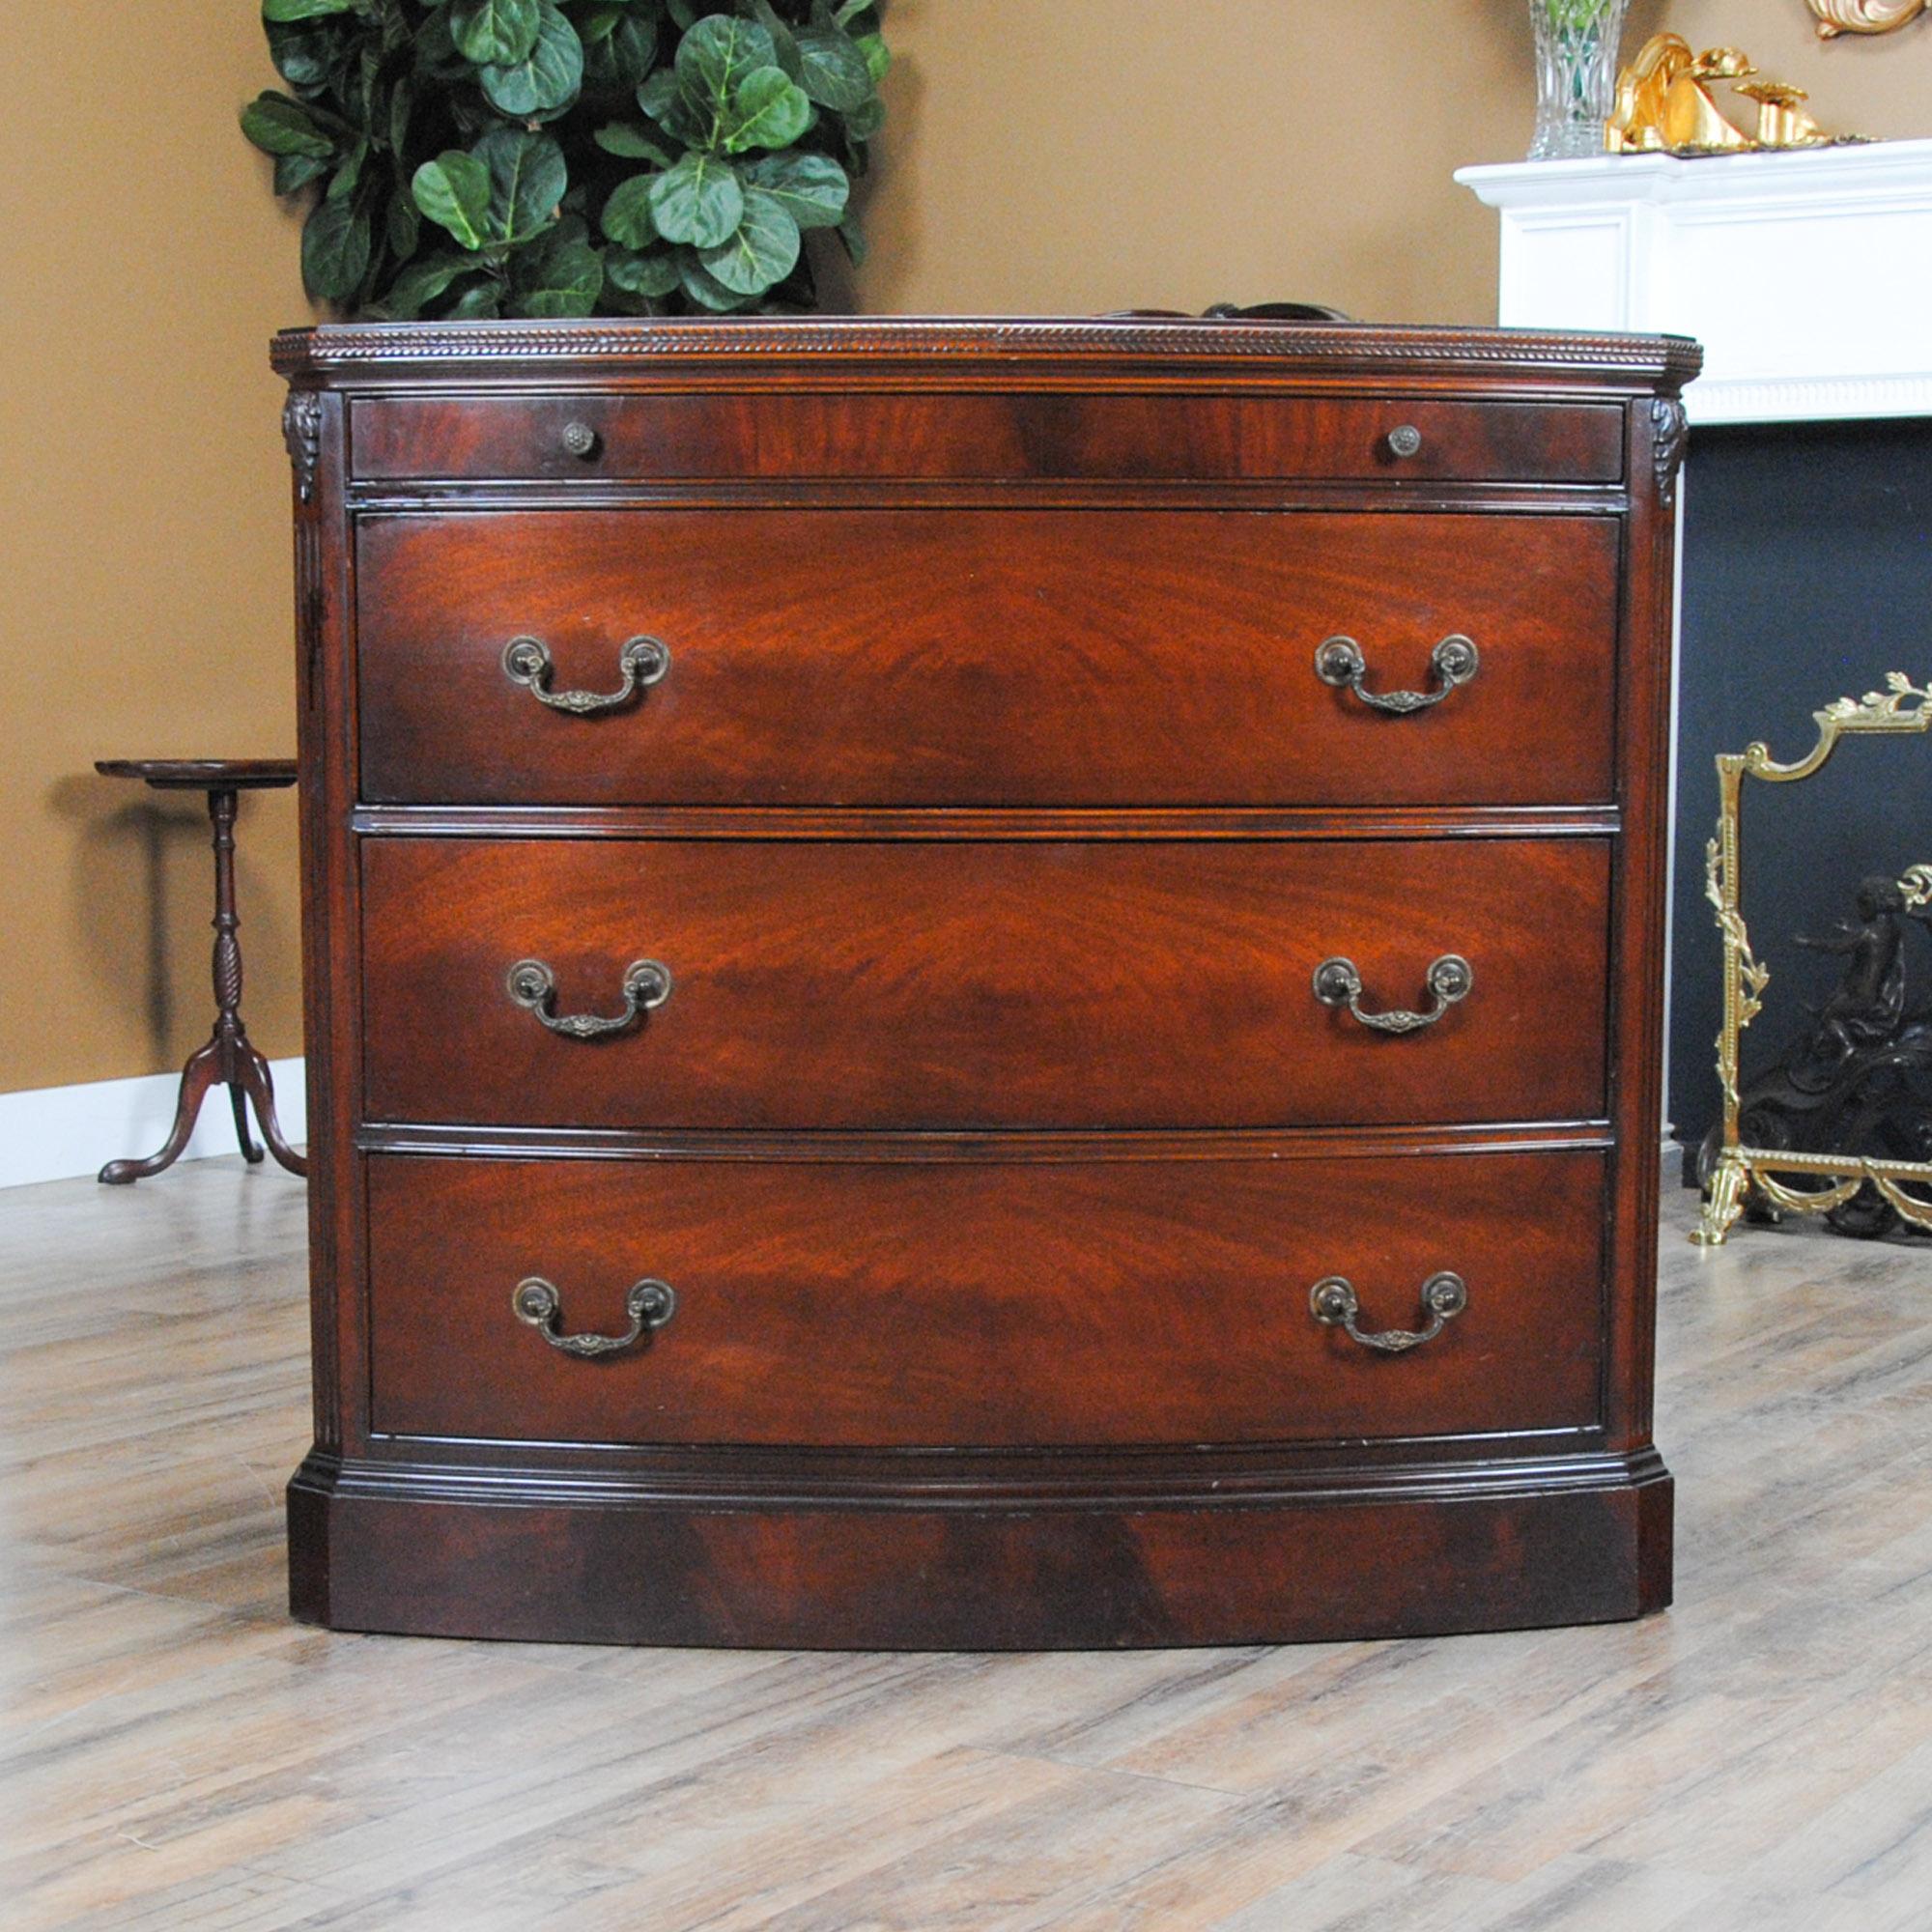 This Vintage Mahogany Bachelors Chest was originally manufactured by the Big Rapids Furniture Co in New York. The Vintage Mahogany Bachelors Chest has a great amount of storage space with a total of four drawers. Produced using the finest quality